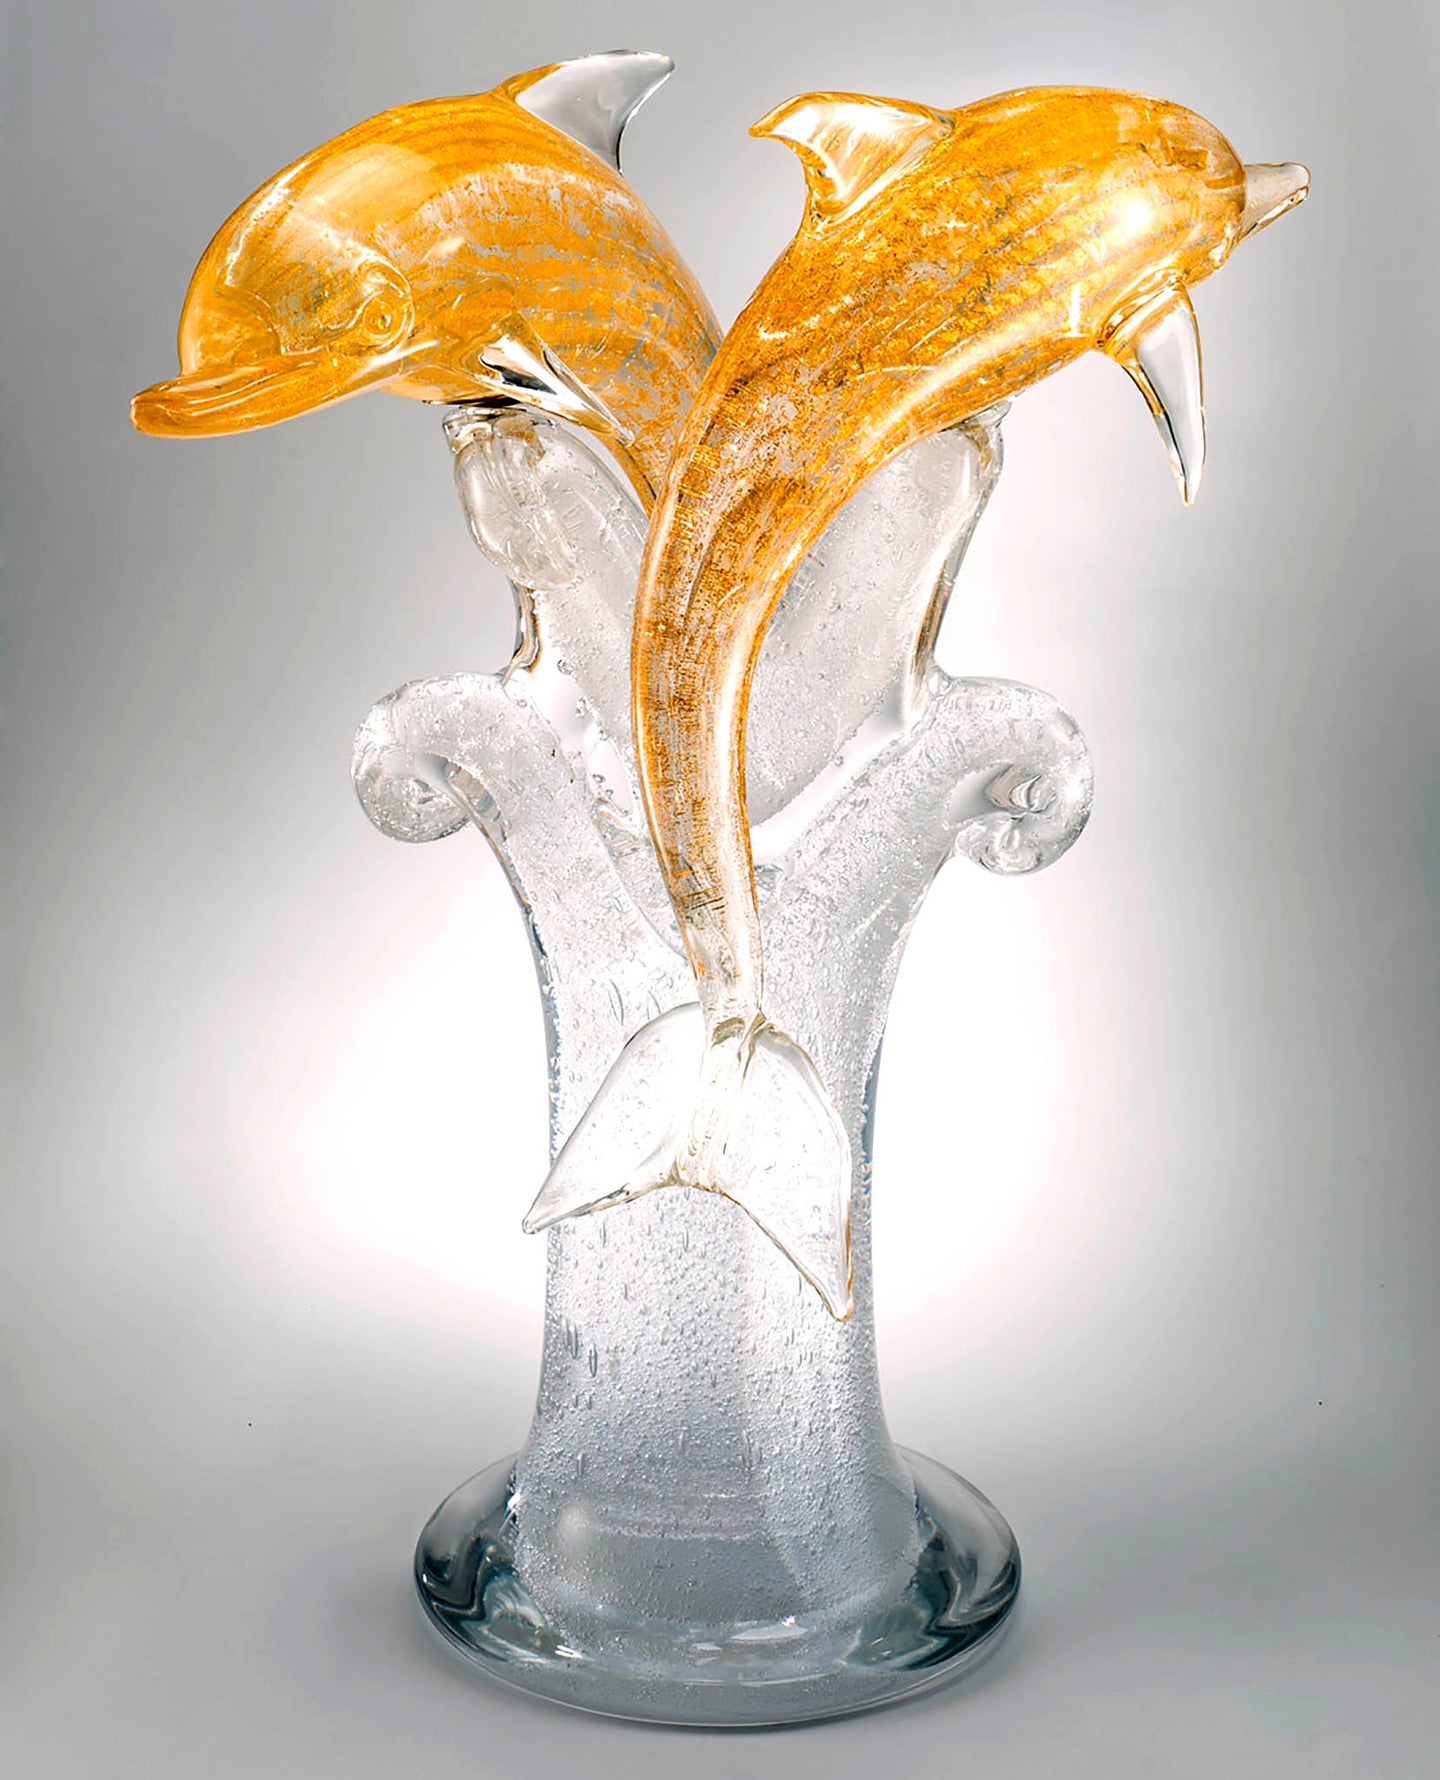 DOLPHINS Murano Glass Sculpture